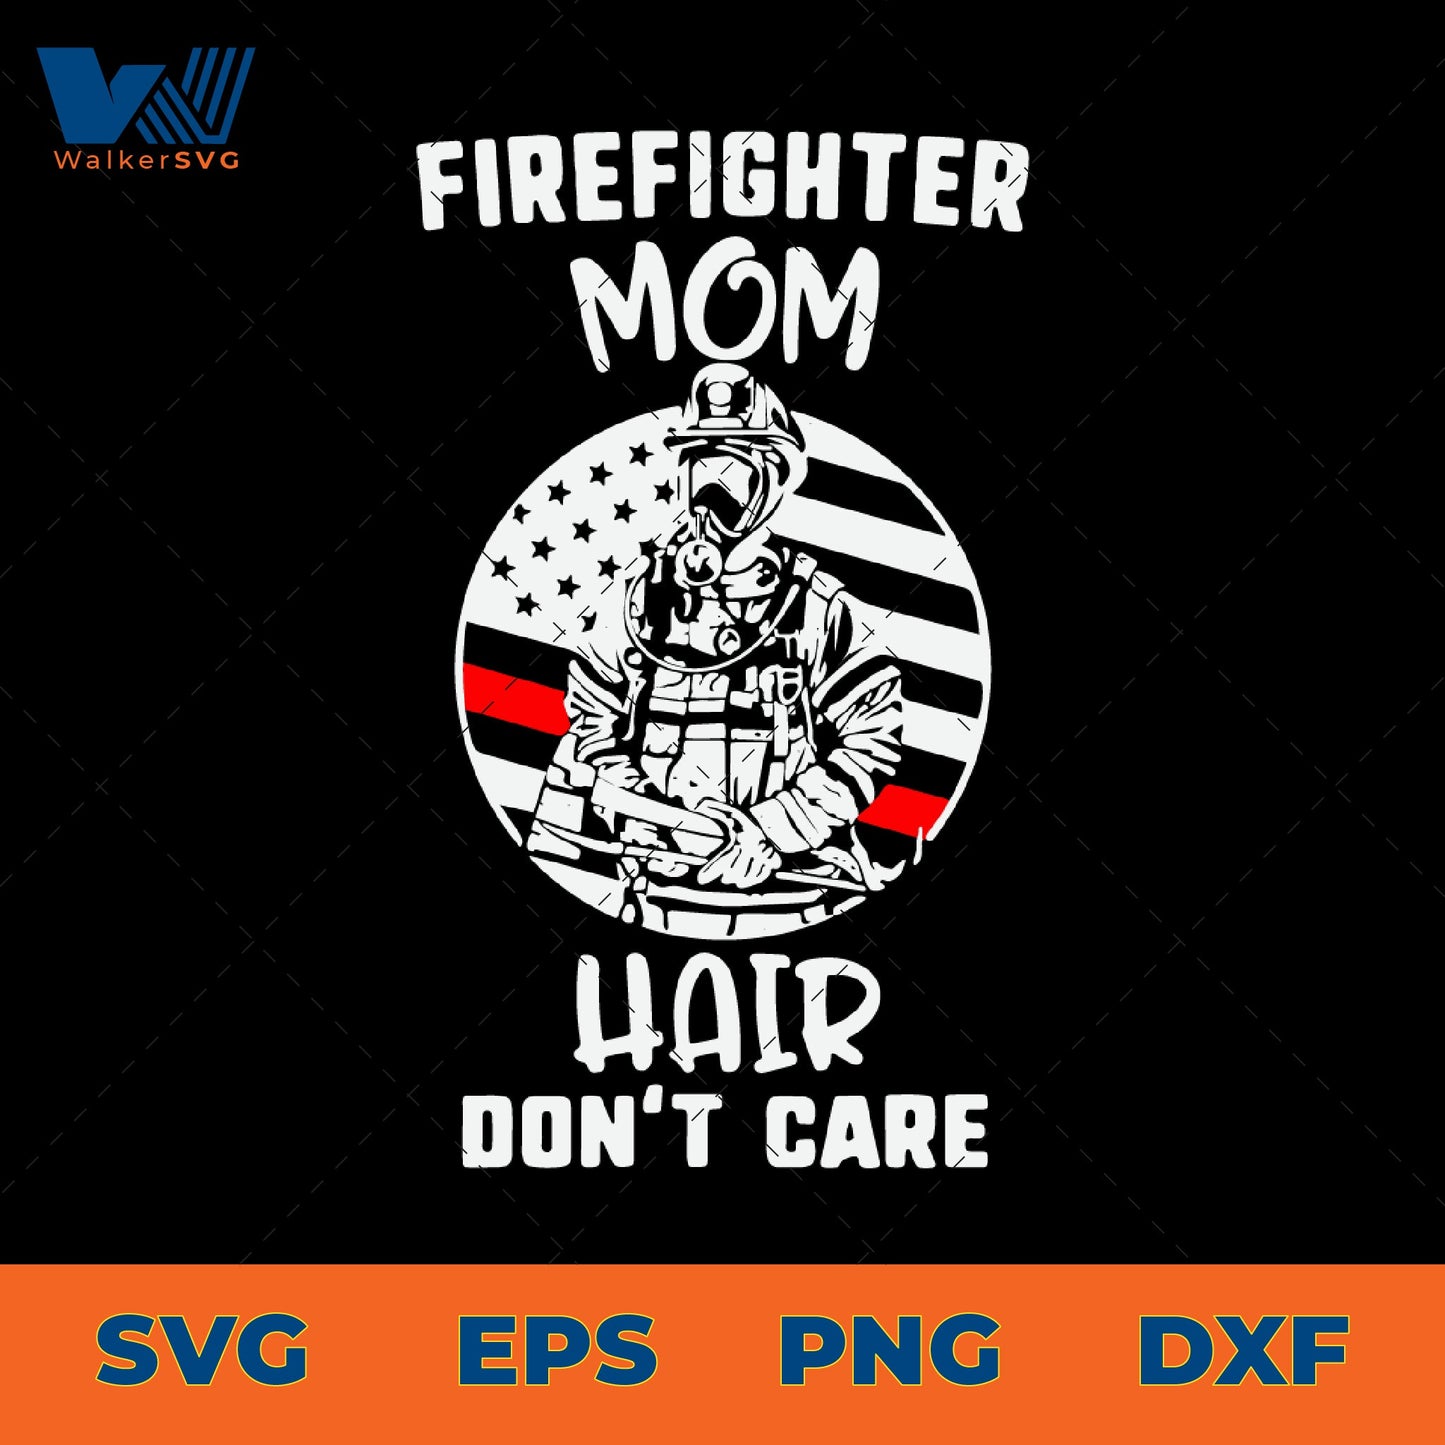 Firefighter Mom, Hair Don't Care SVG